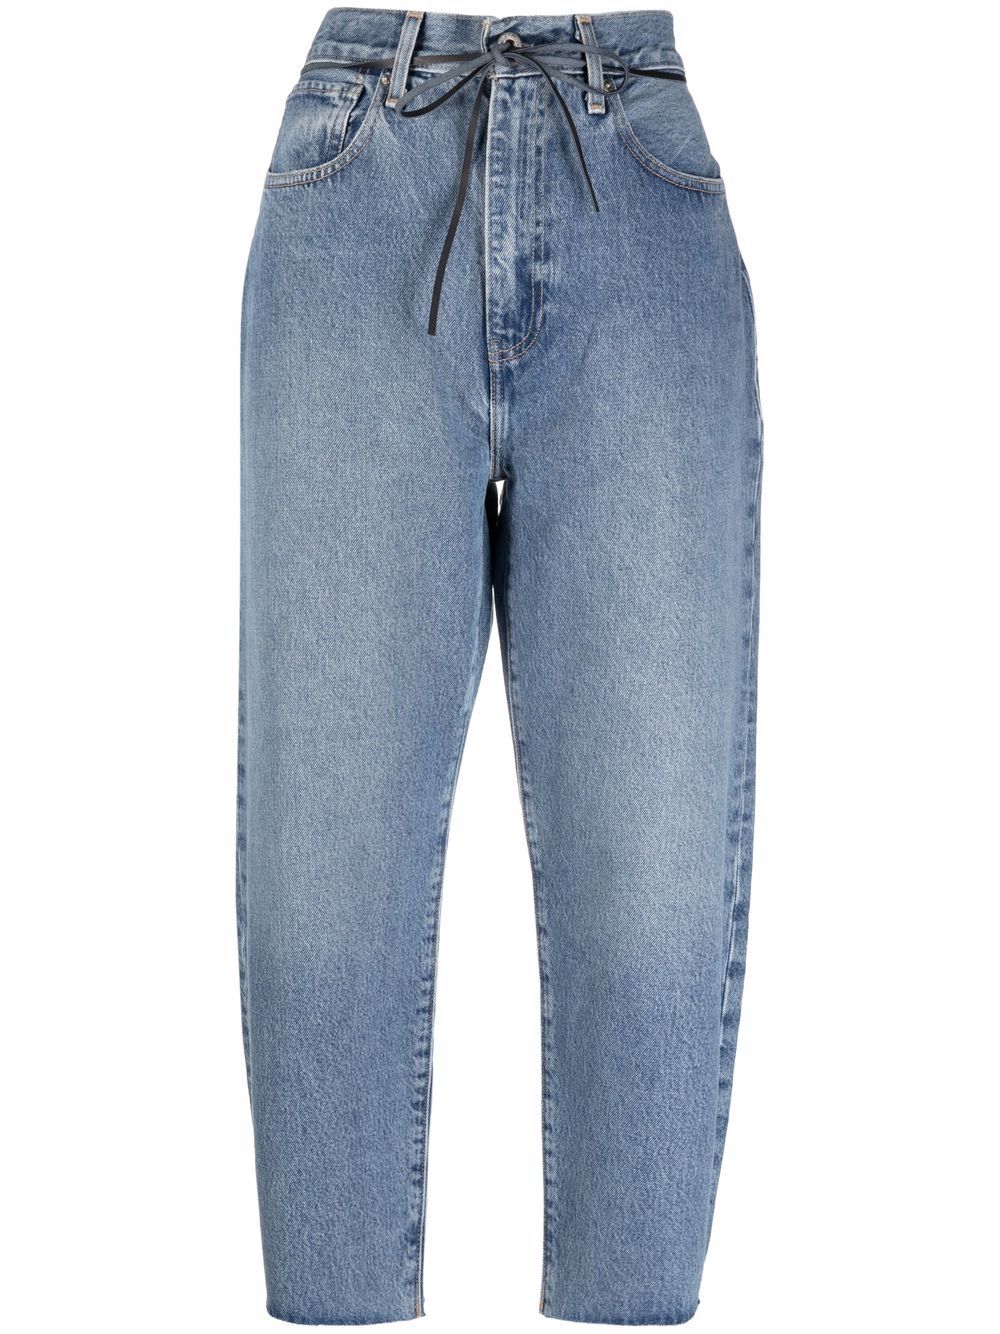 Levi's: Made & Crafted barrel cropped jeans